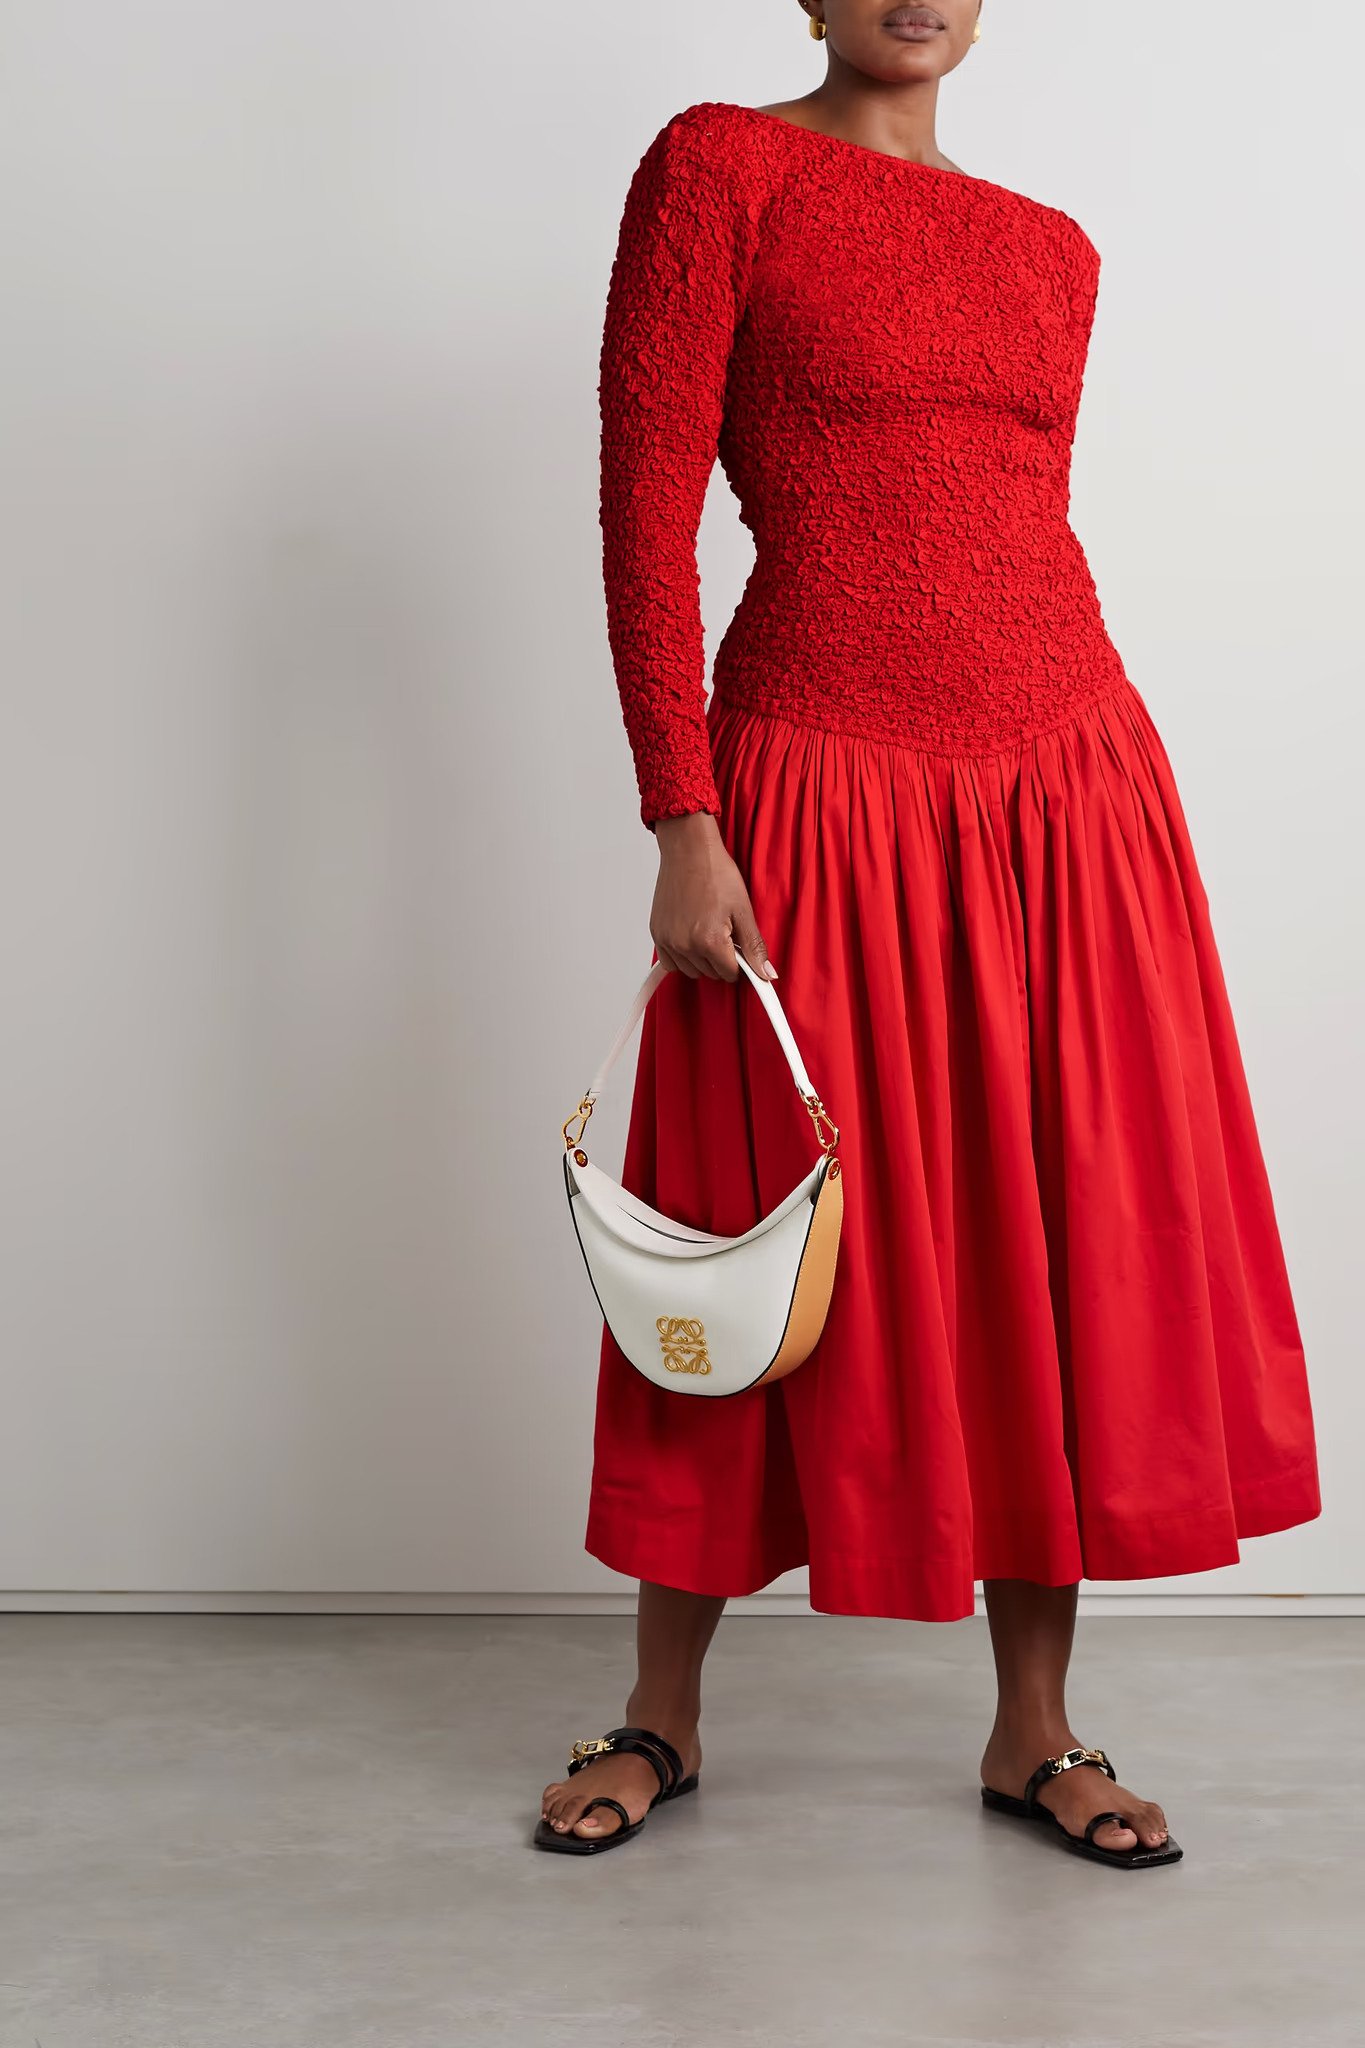 The 18 Best Red Christmas Dresses You Need to See | Who What Wear UK